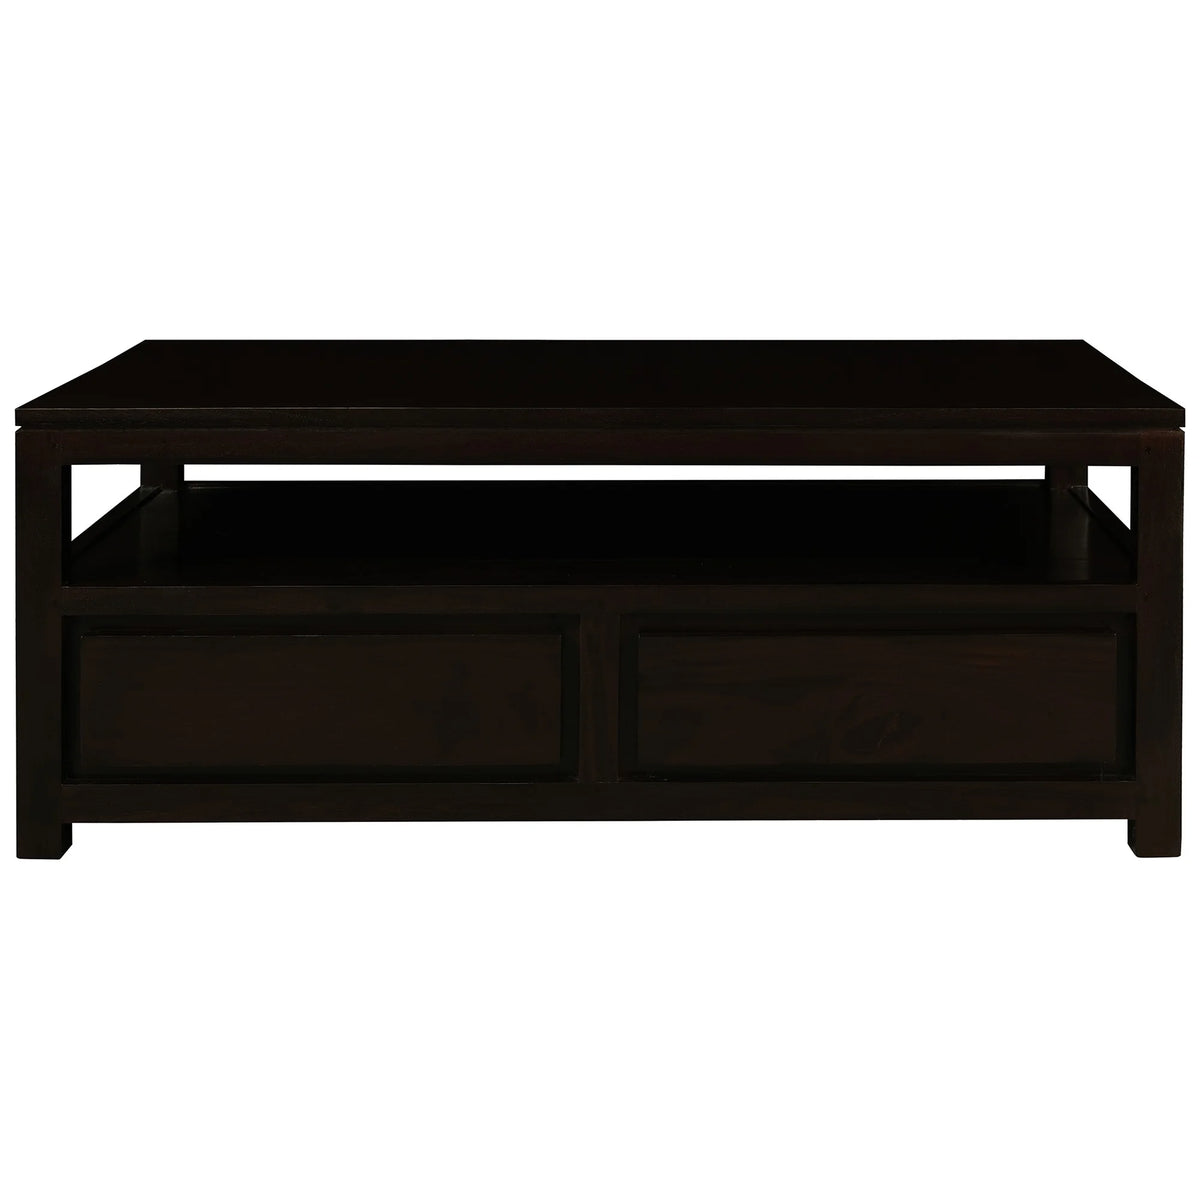 Amsterdam Timber 4 Drawers Coffee Table - Chocolate - Notbrand